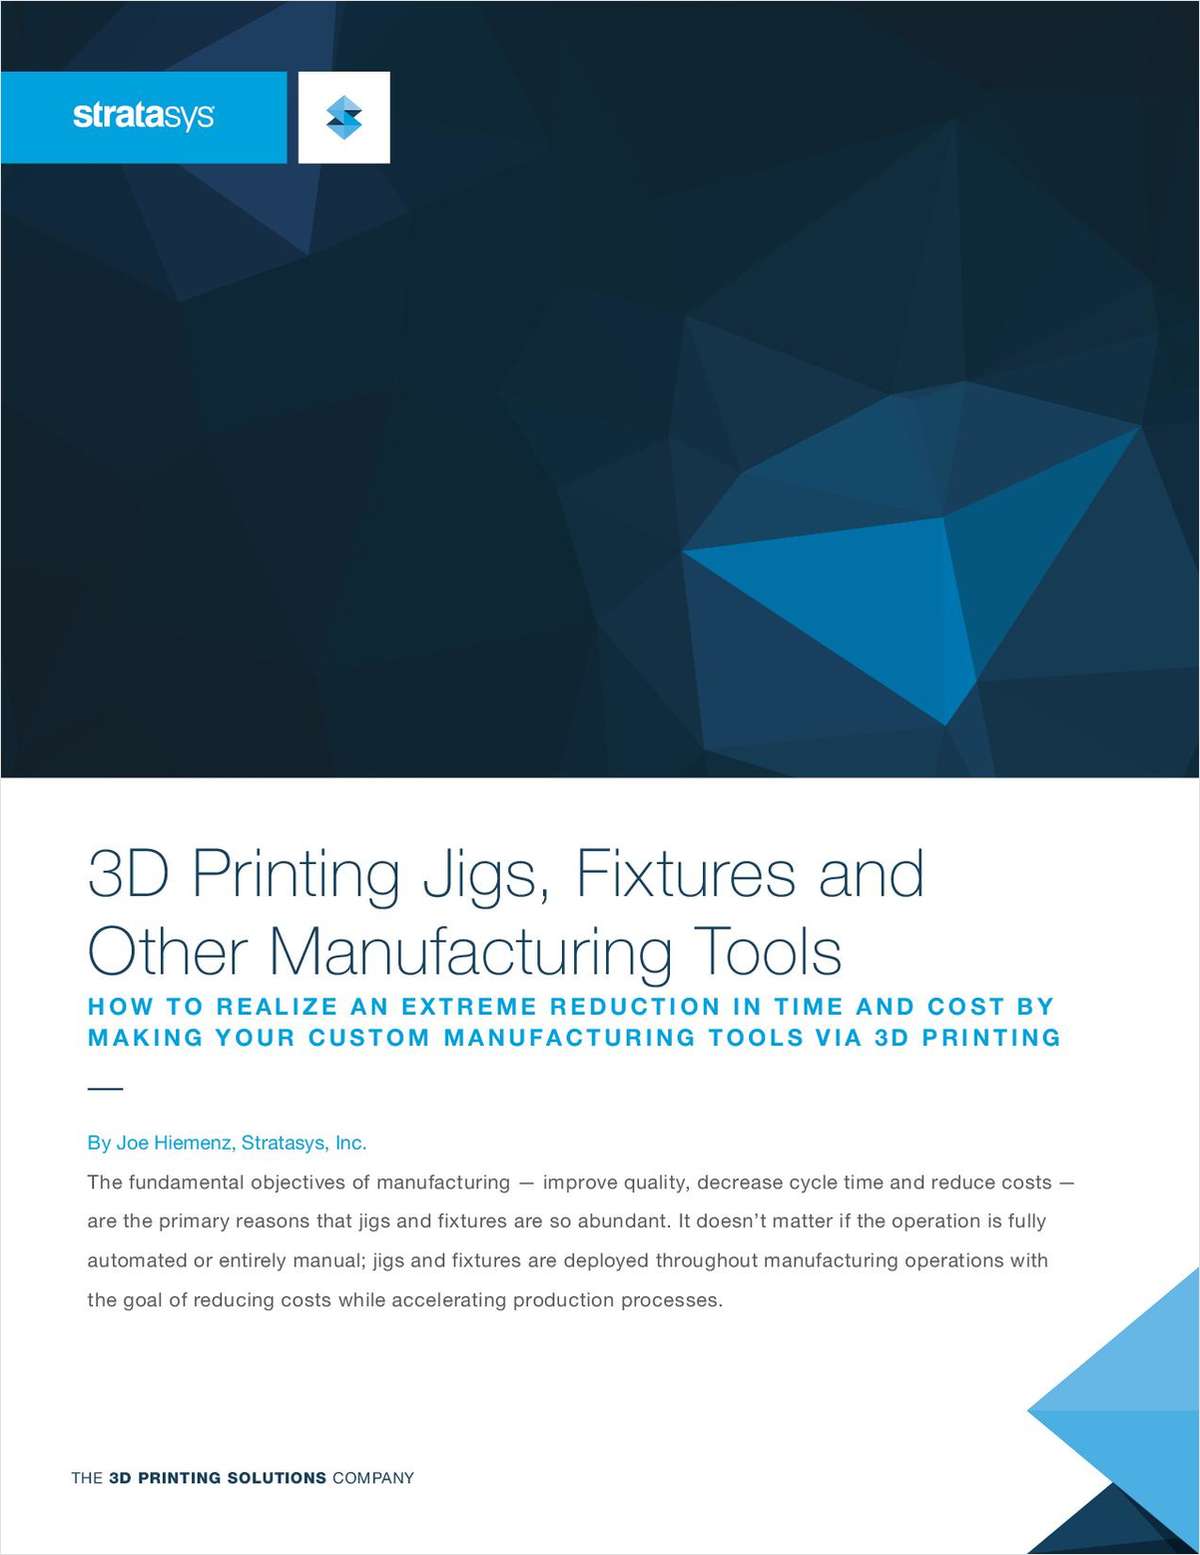 3D Printing Jigs, Fixtures and Other Manufacturing Tools